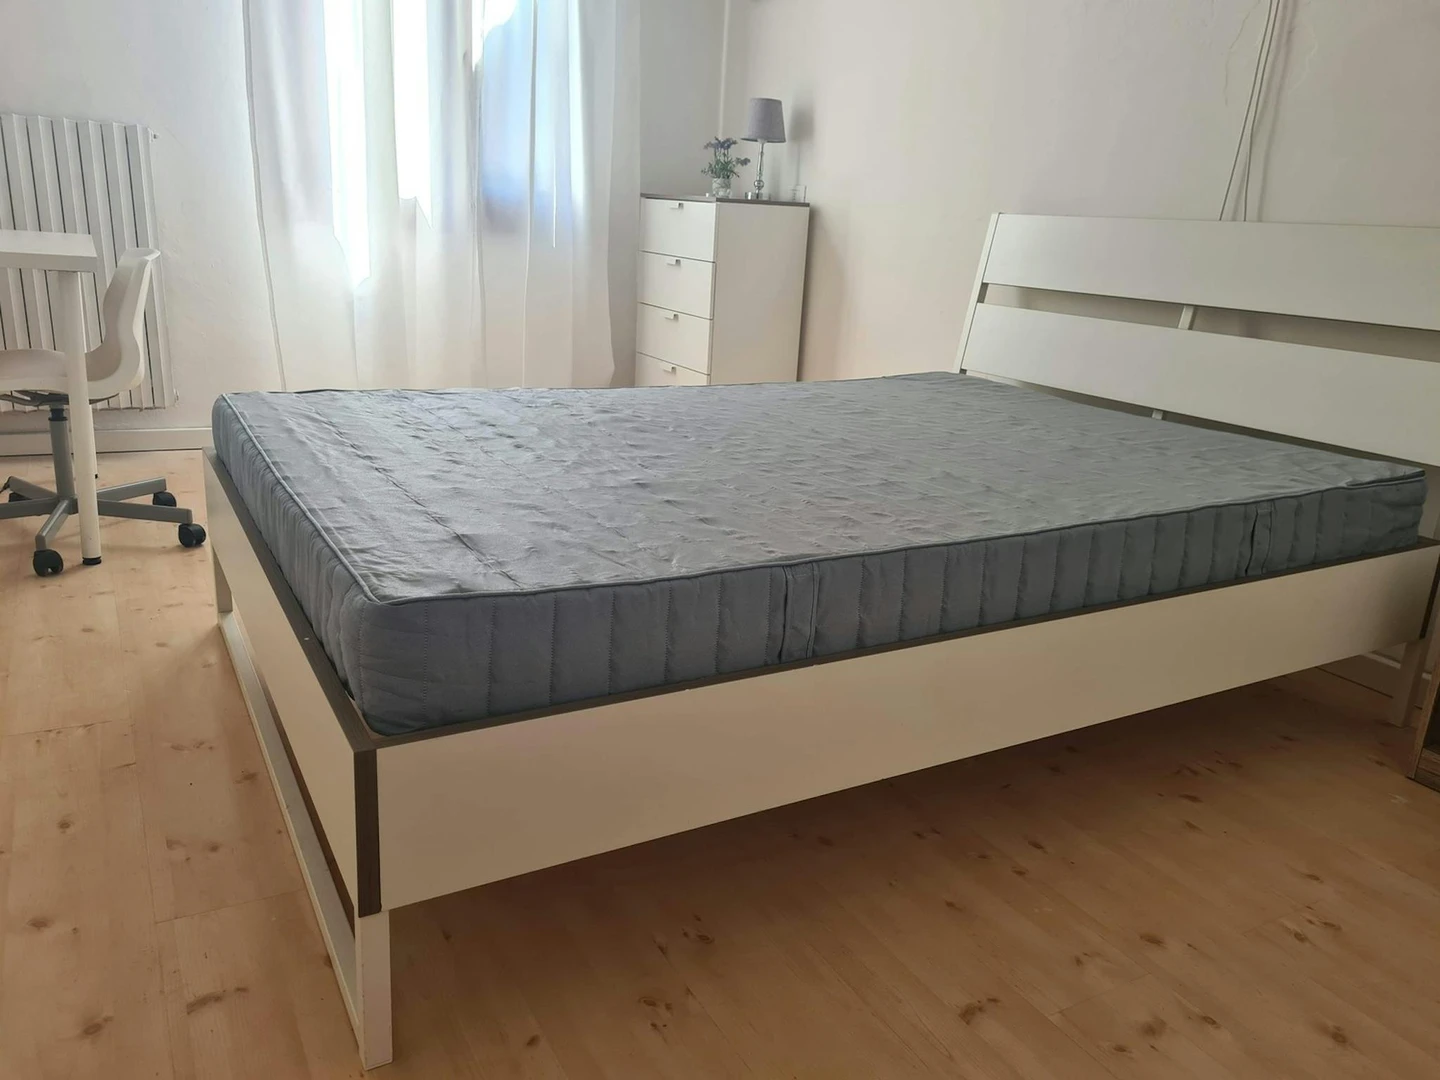 Cheap private room in Vicenza